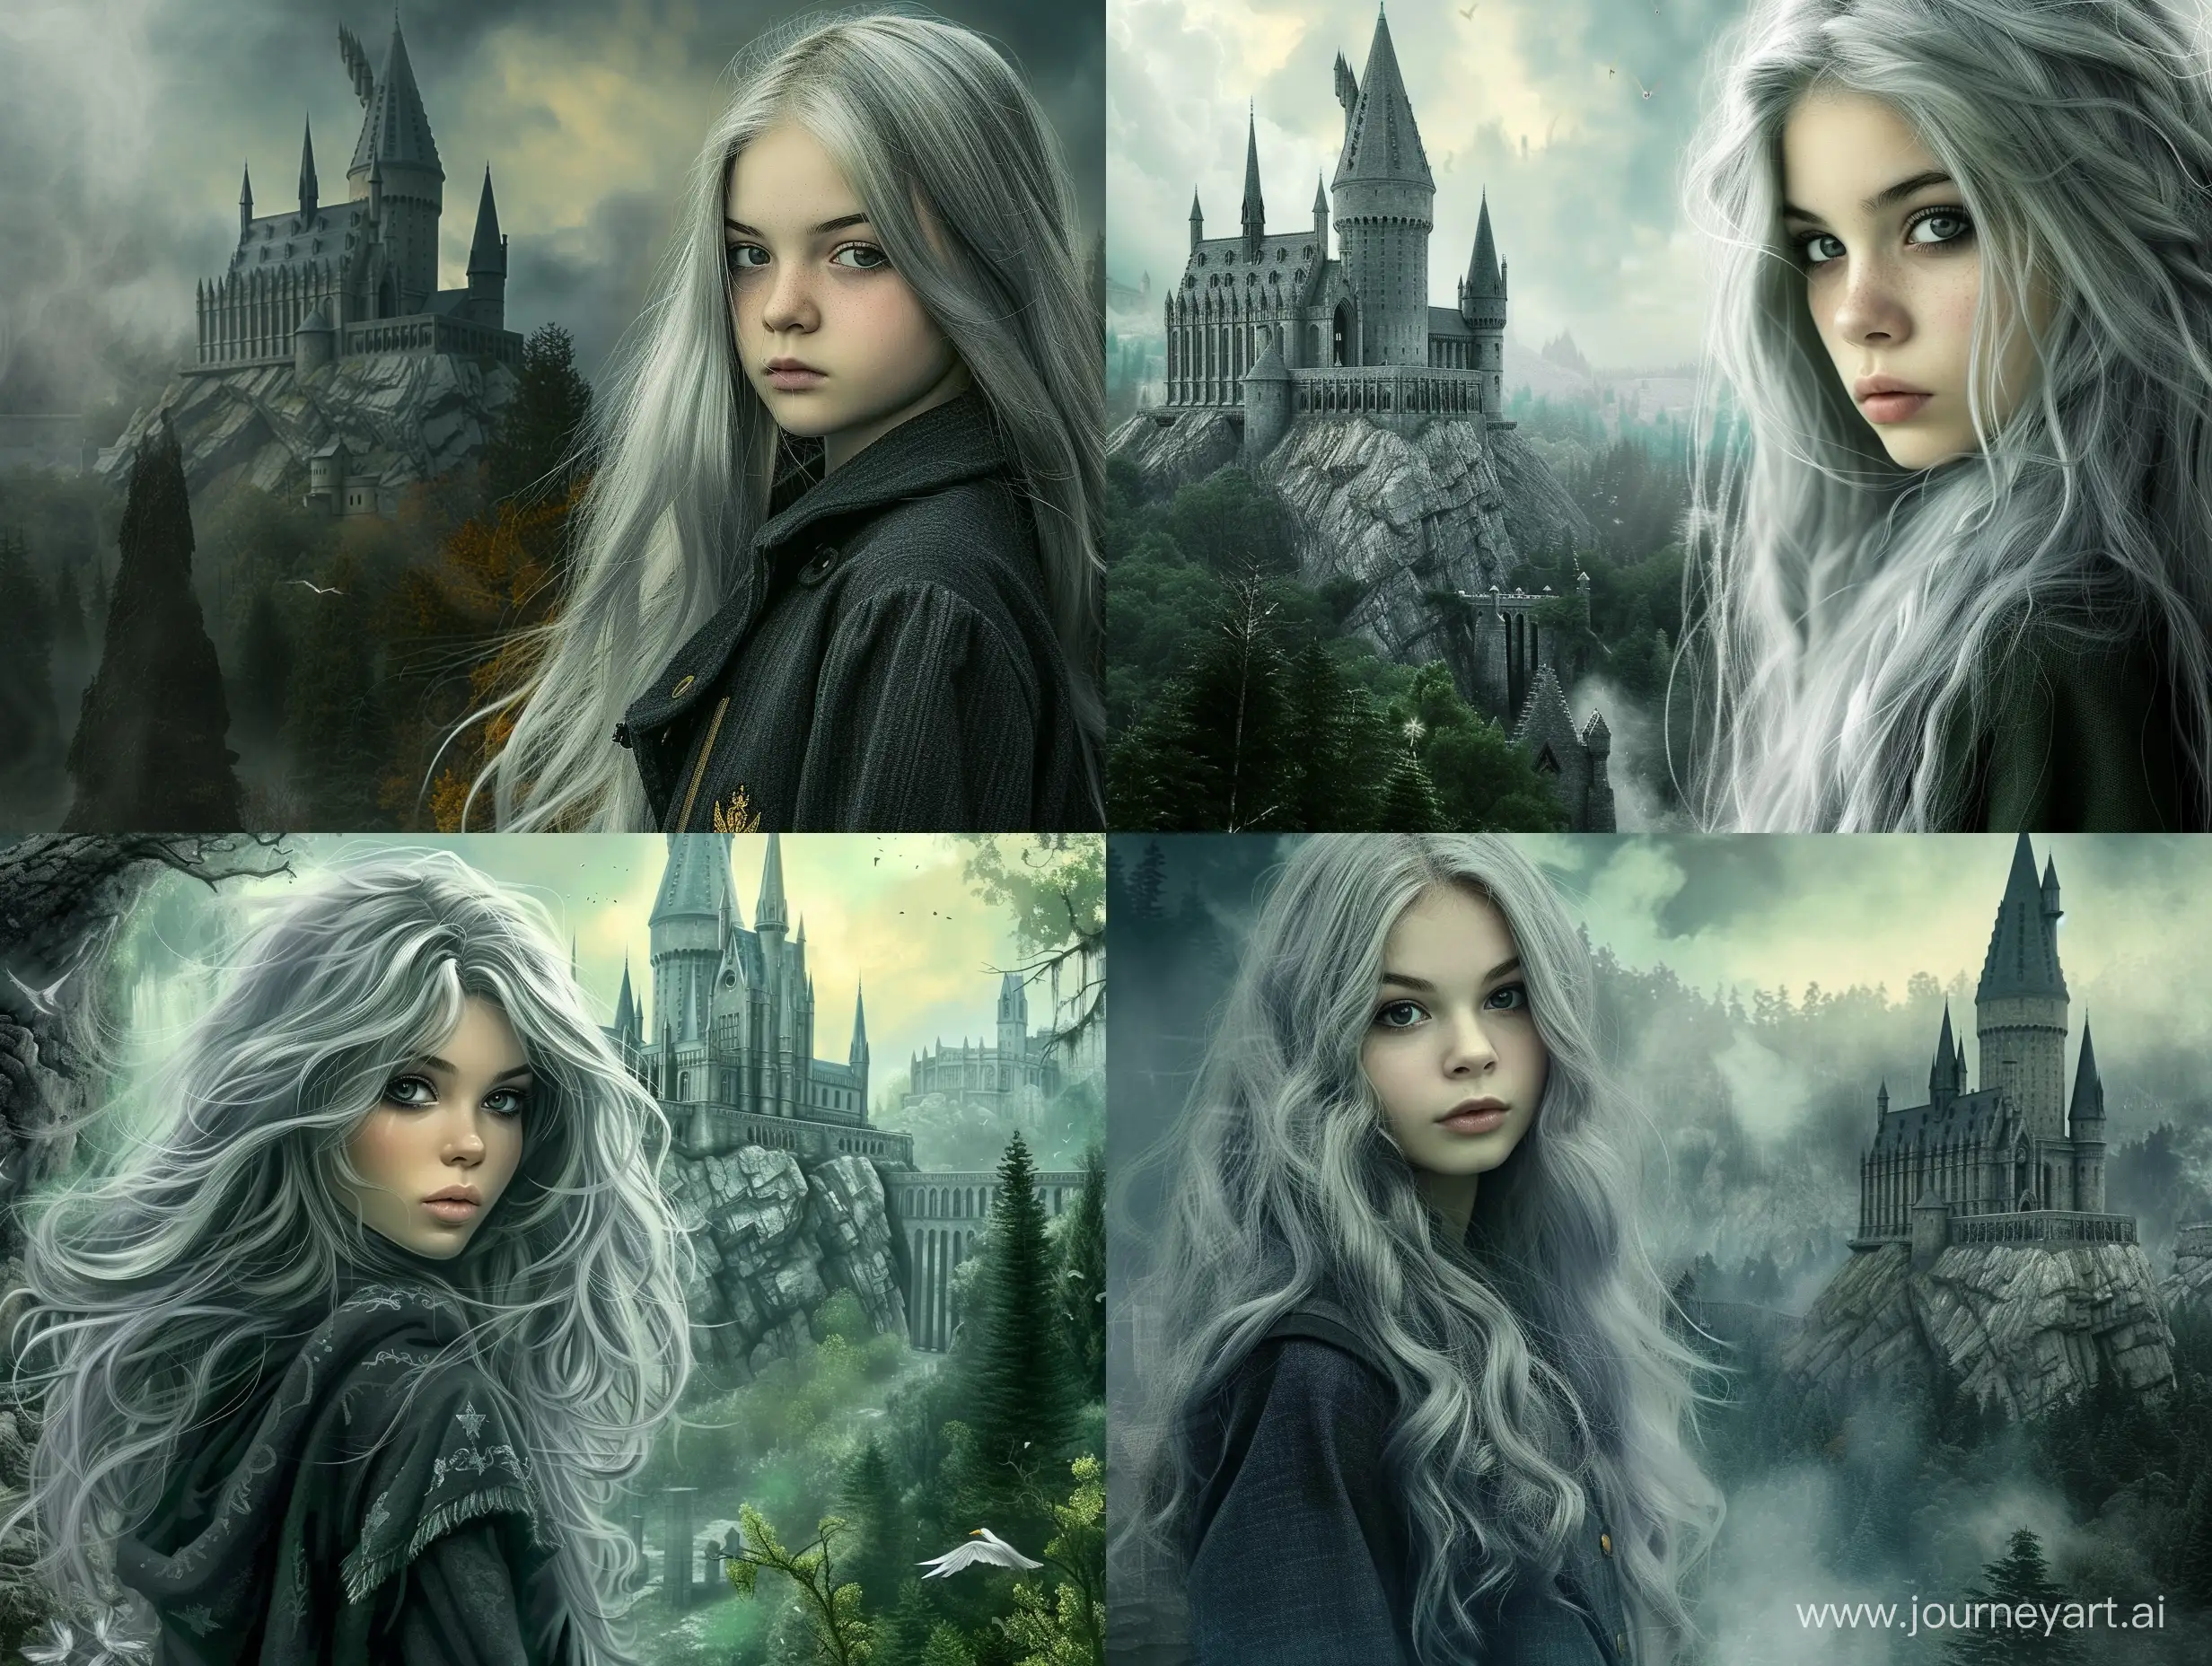 A girl, a young sorceress, 16 years old, a student at Hogwarts school, Ravenclaw faculty, long silver hair, gray eyes, an ancient castle and a forest in the background